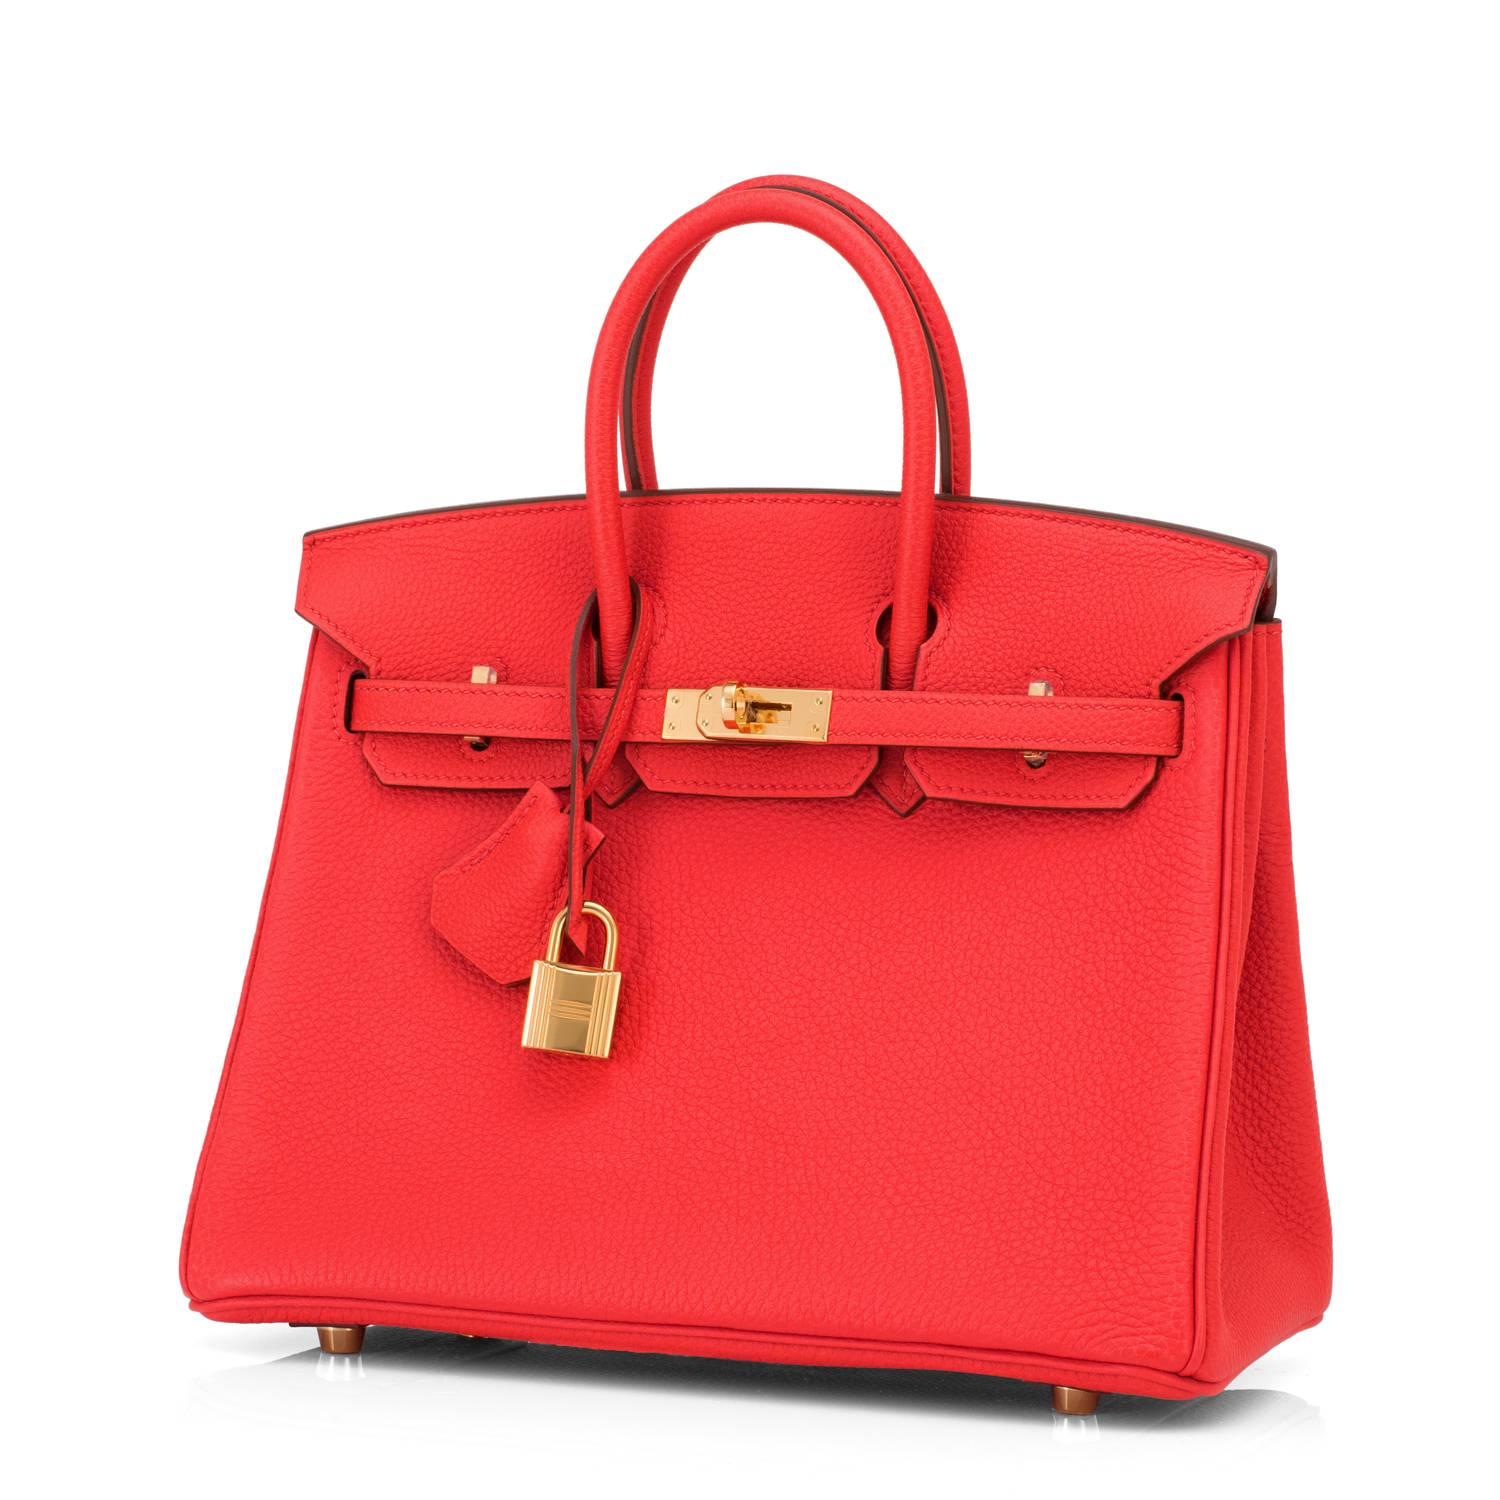 Hermes Capucine Baby Birkin Red Orange 25cm Togo Gold Hardware Darling 
Brand New in Box. Store fresh. Pristine condition (plastic on hardware). 
Perfect gift! Comes full set with keys, lock, clochette, a sleeper for the bag, rain protector, and